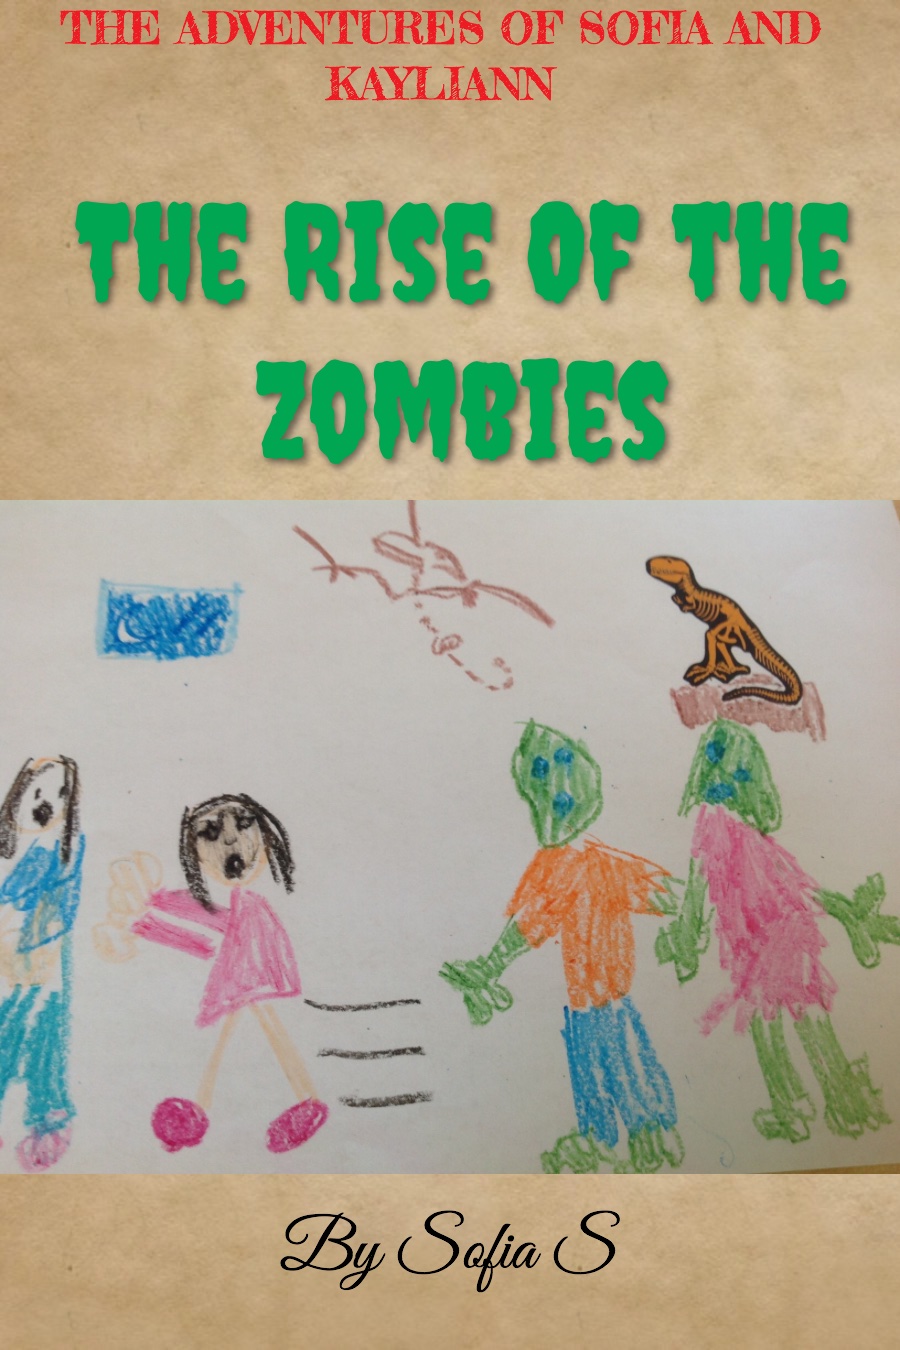 THE RISE OF THE ZOMBIES By Sofia S